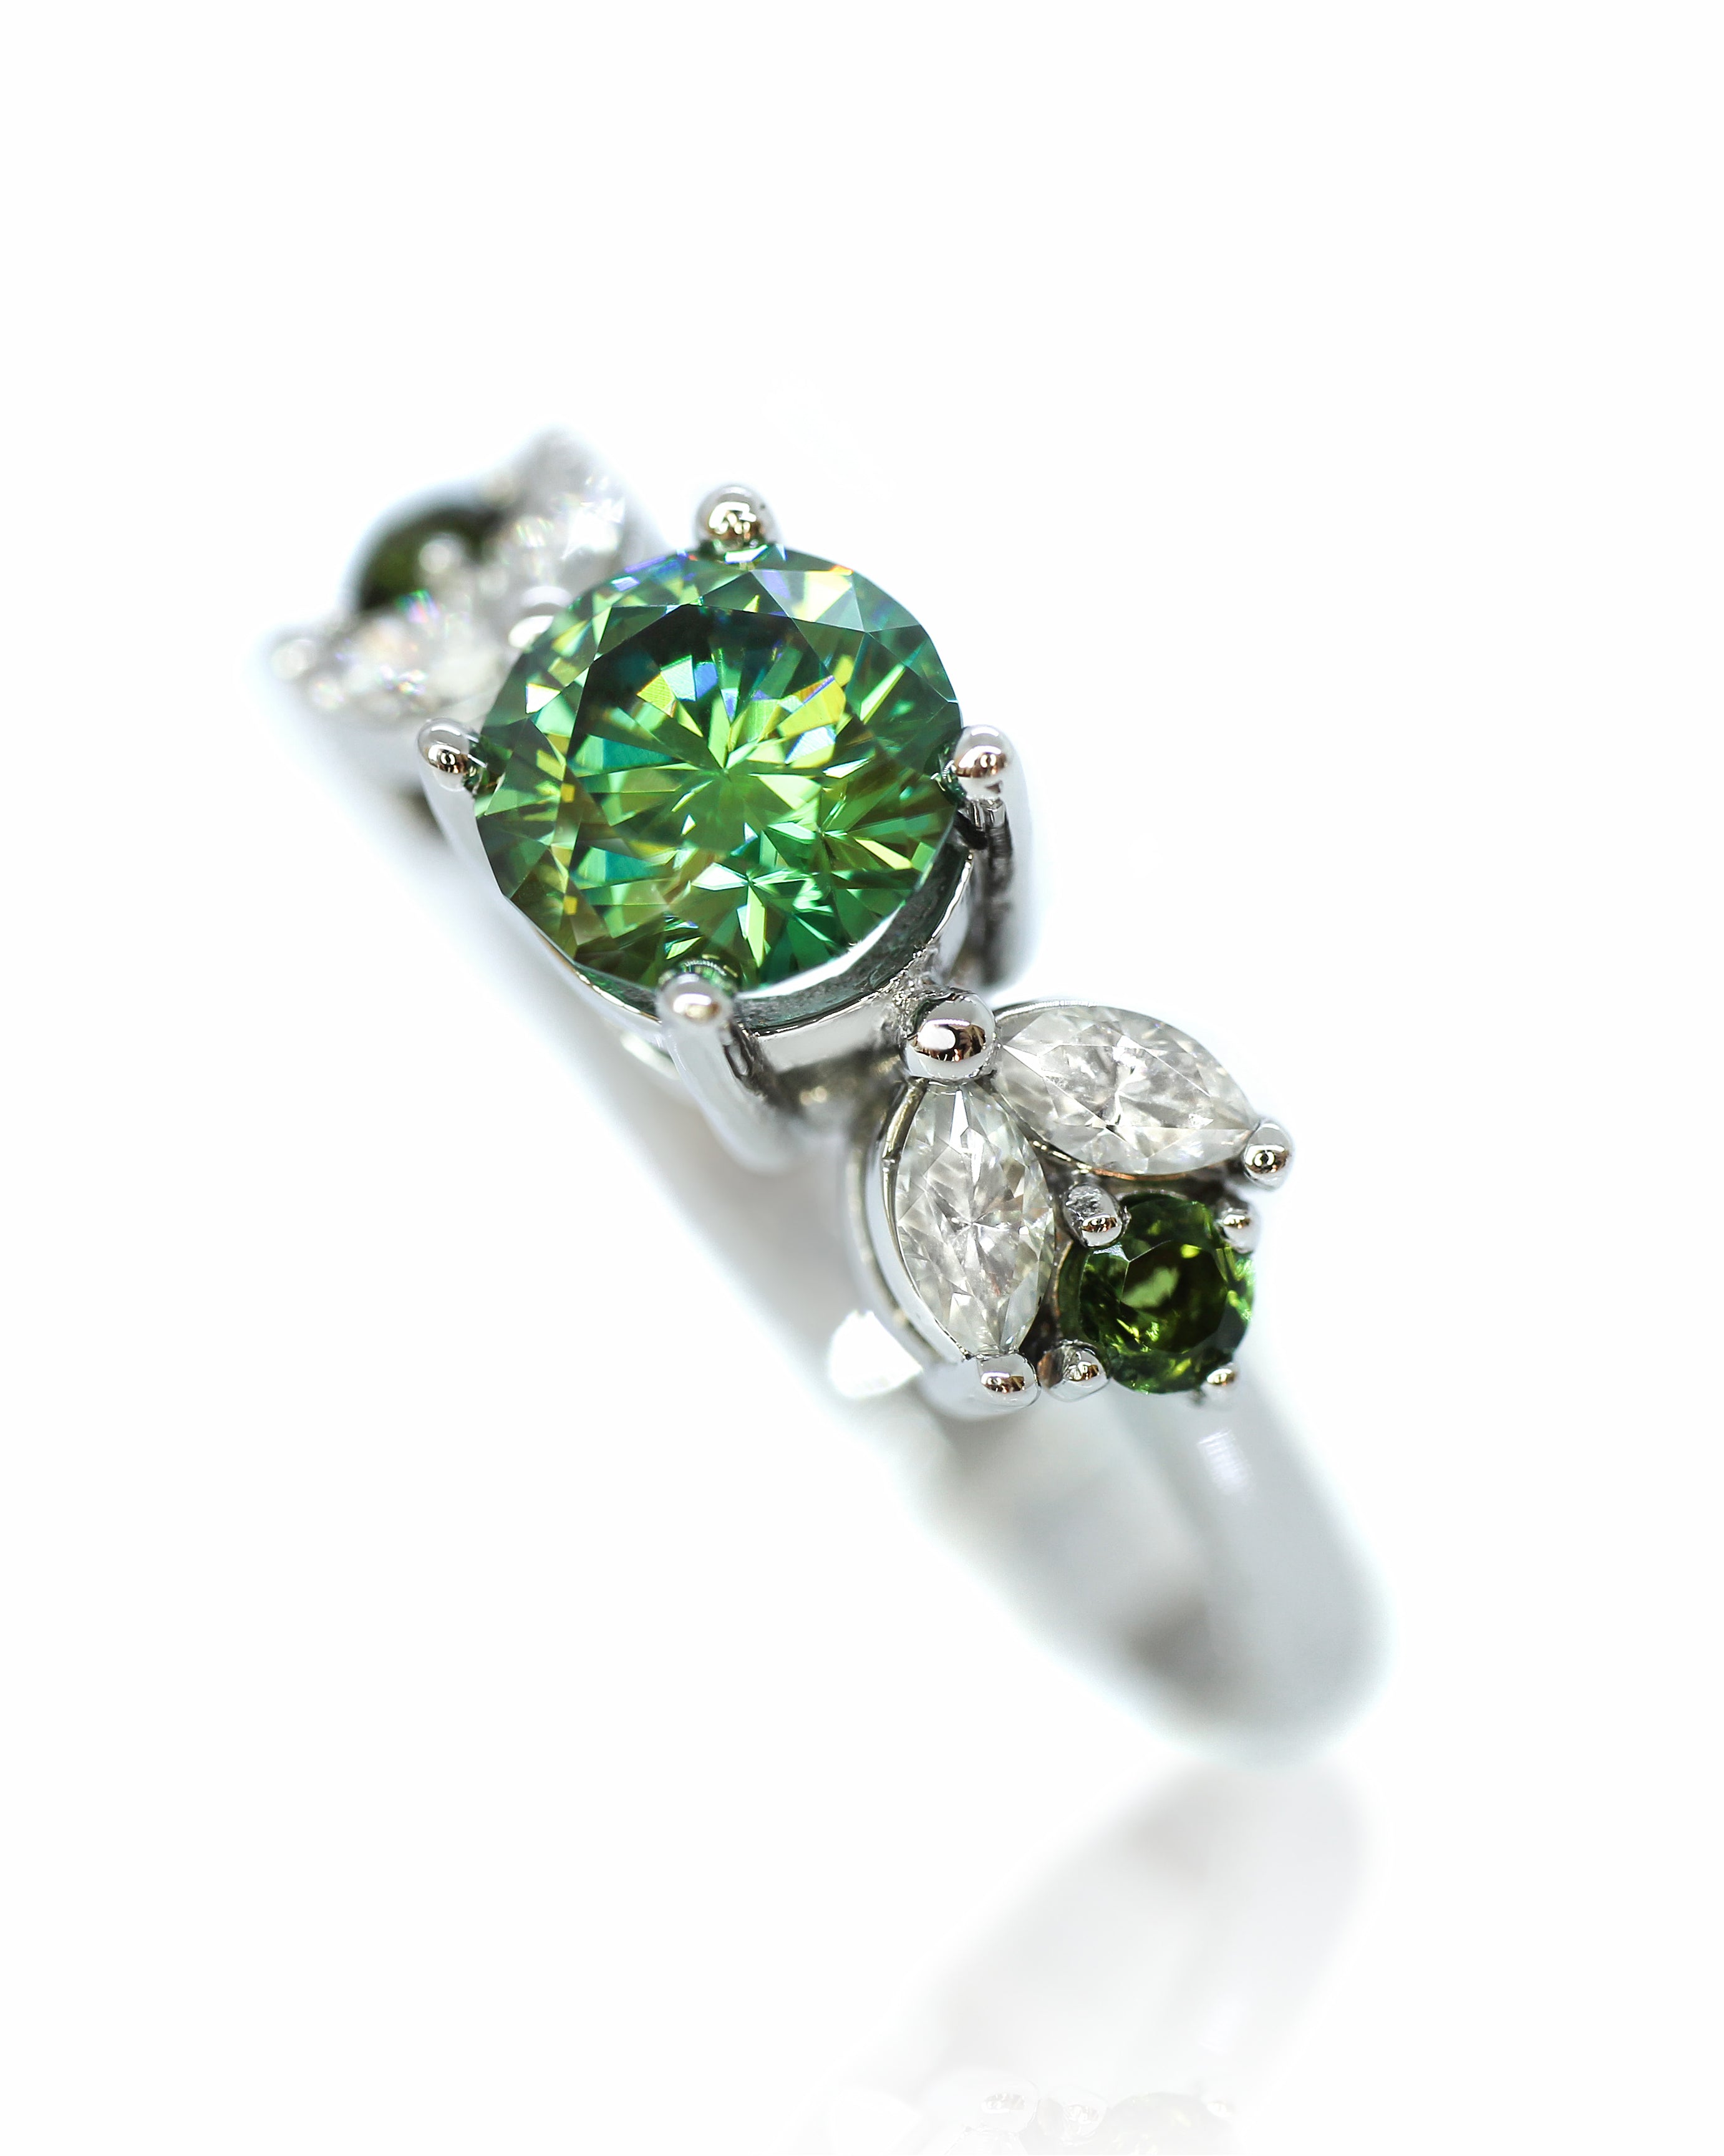 1 Carat Green Moissanite Engagement Ring | Buy Handcrafted Ring